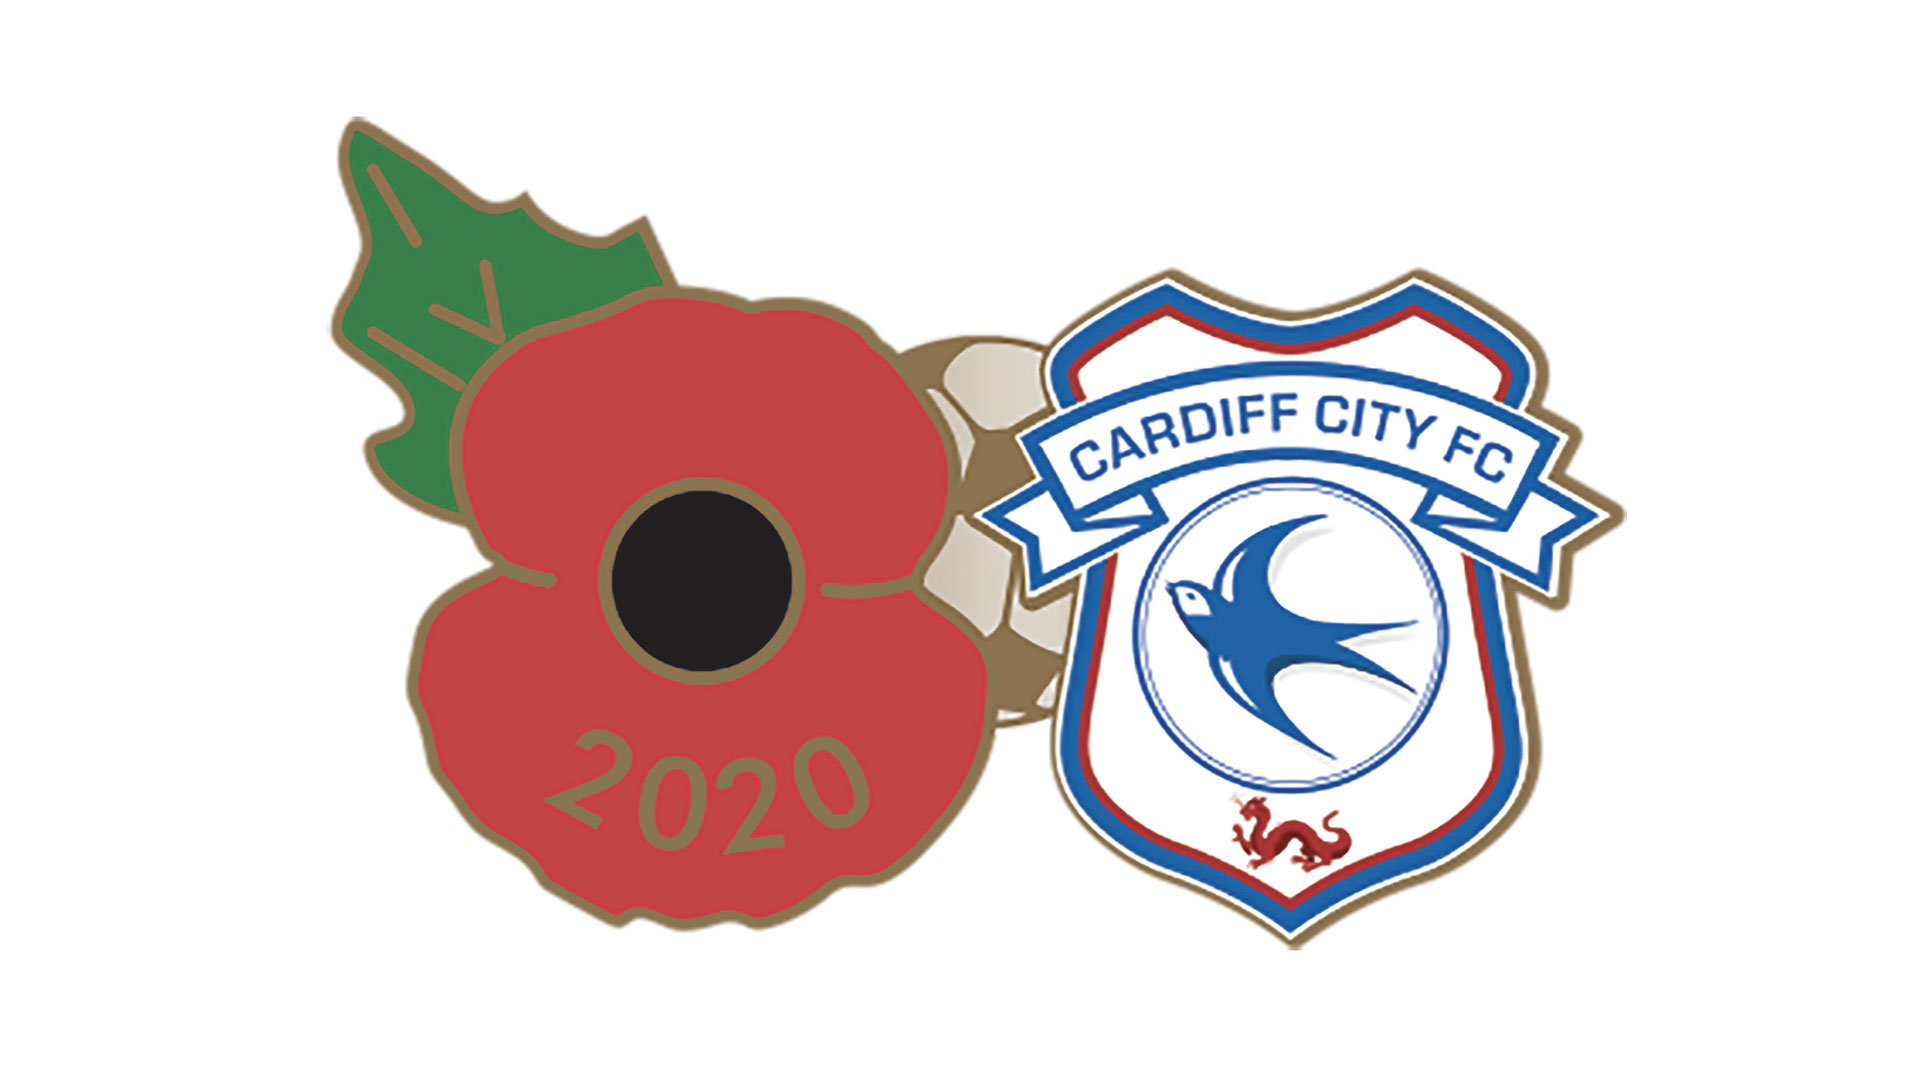 Our 2020 Poppy is now available...